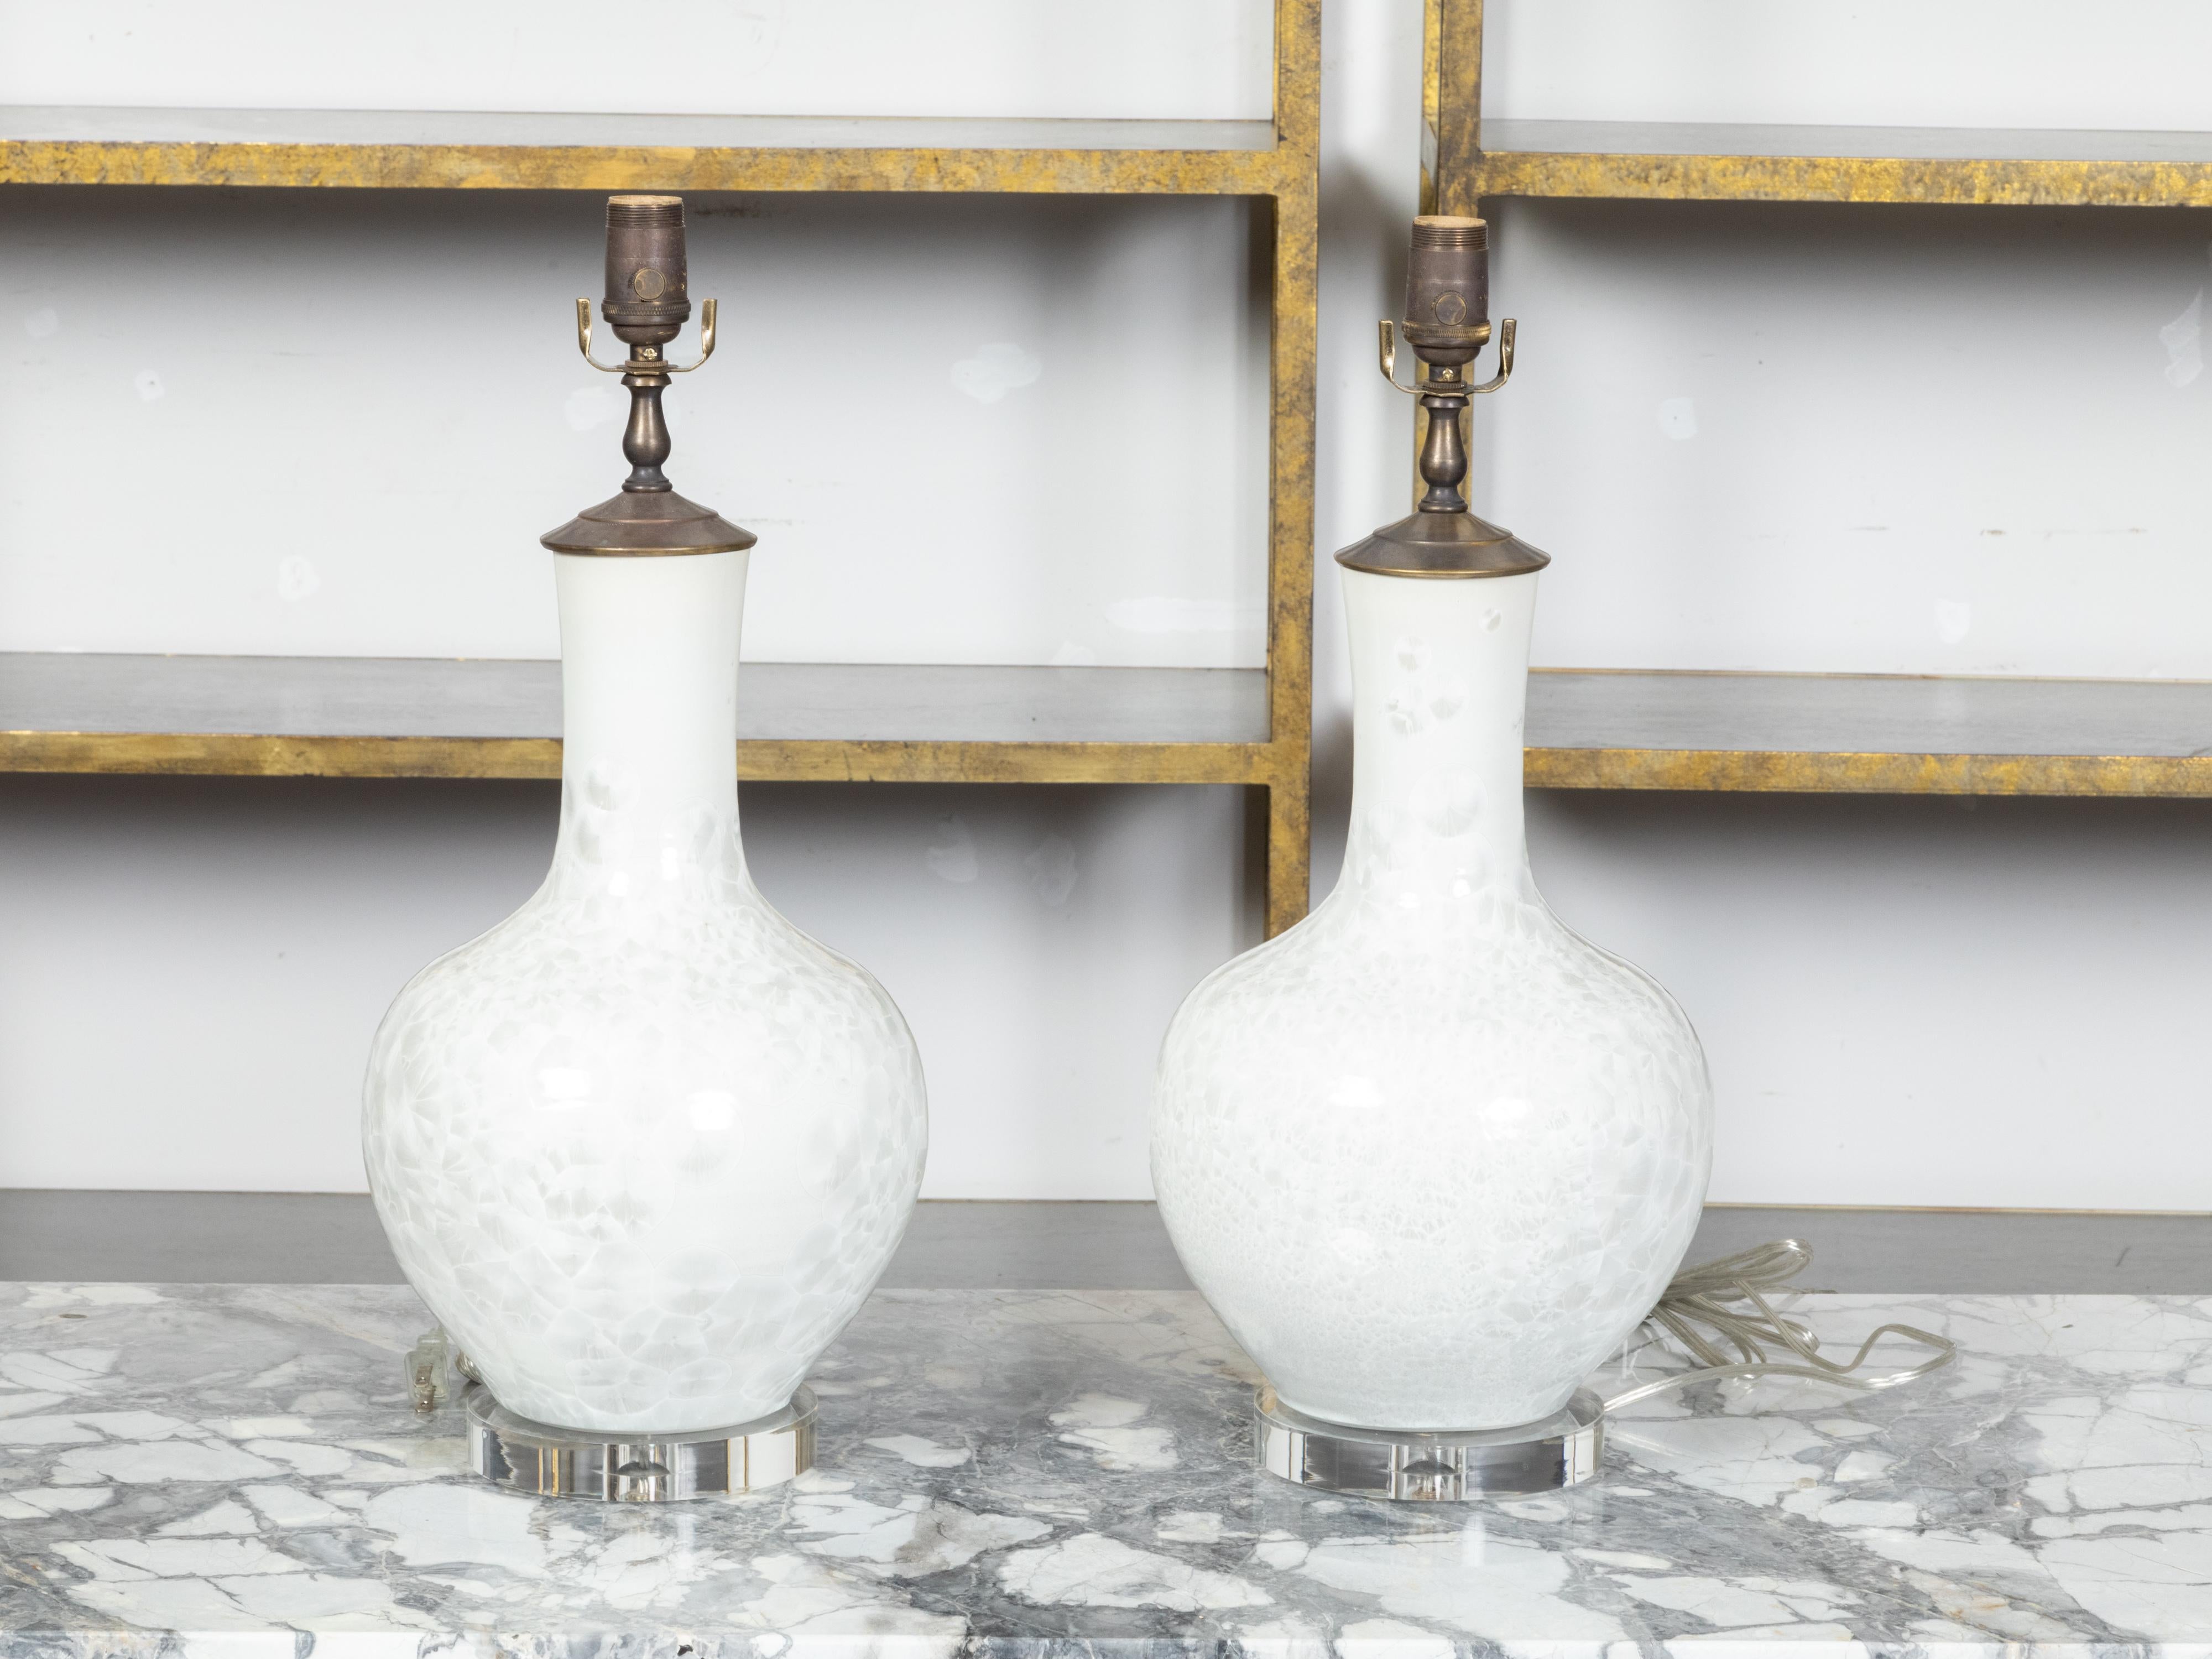 A pair of Asian white porcelain table lamps with textured effects, custom made circular lucite bases and professional rewiring for the US. Created in Asia each of this pair of table lamps features a white porcelain vase with narrow neck and generous